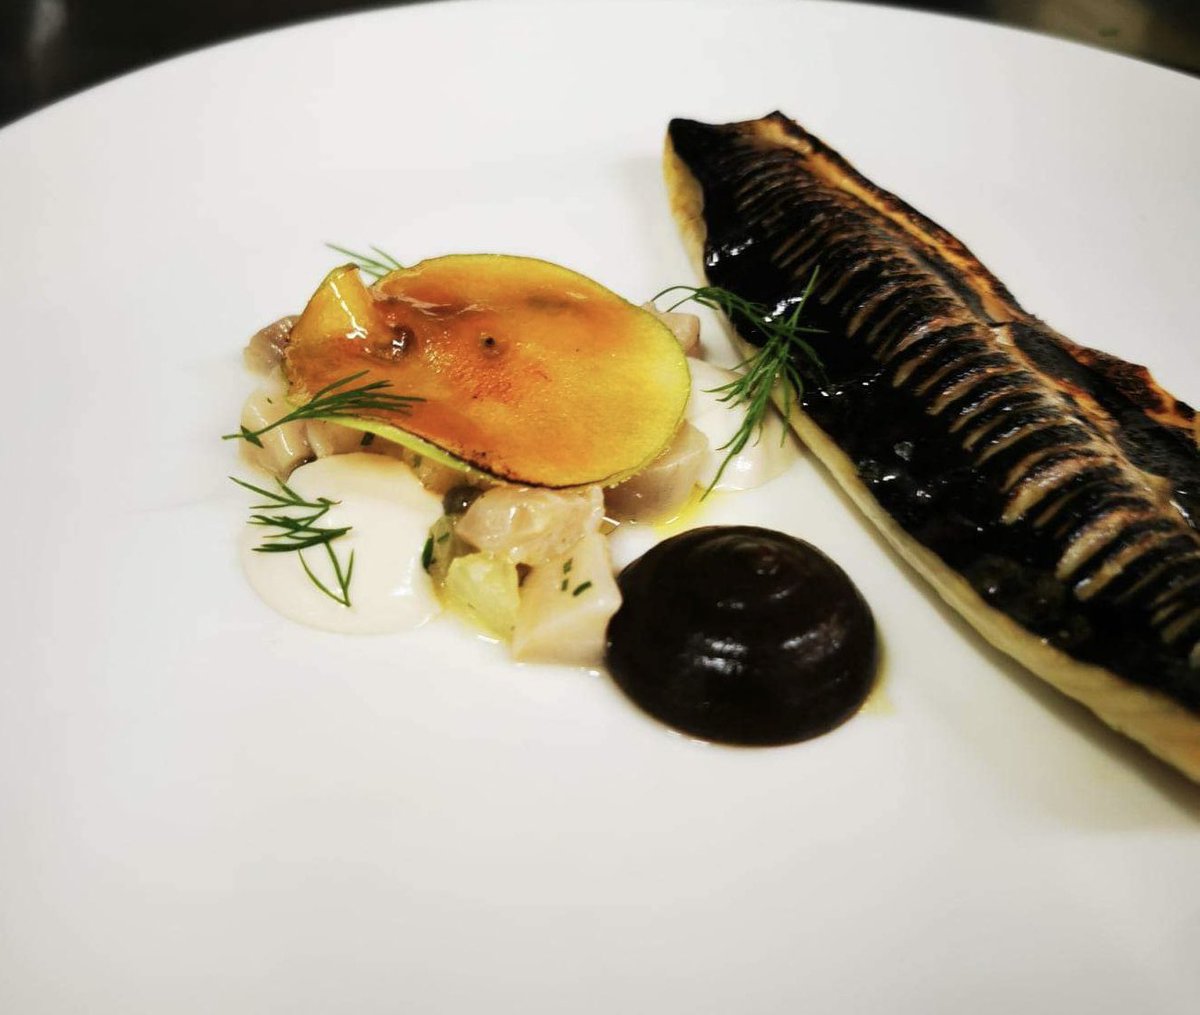 Here’s last weeks Torched Fillet of Mackerel – Apple – Lime – Coriander to tease those taste buds Rolling again from Wednesday bookings via the website routenewcastle.co.uk/route-bistro-m… #newcastle #newcastlefood @Ne1Tweets